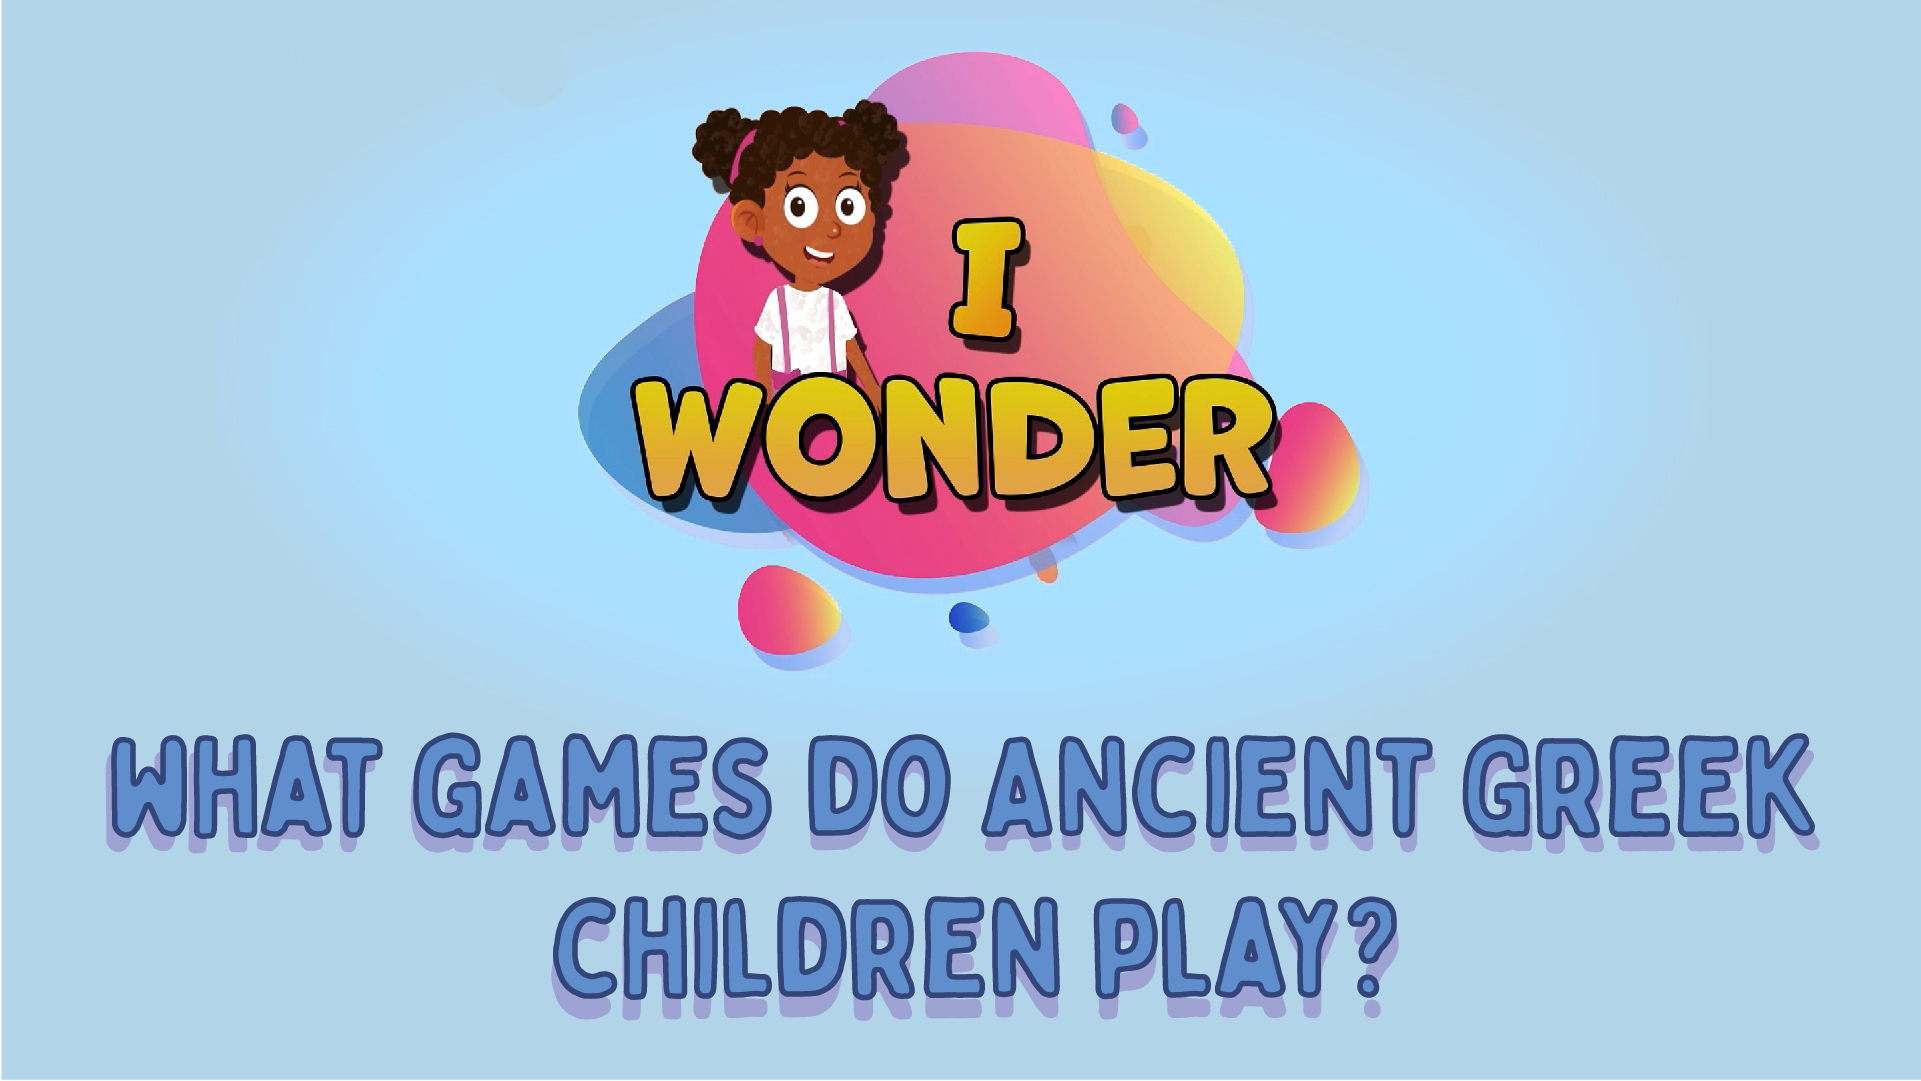 What Games Did Ancient Greek Children Play?